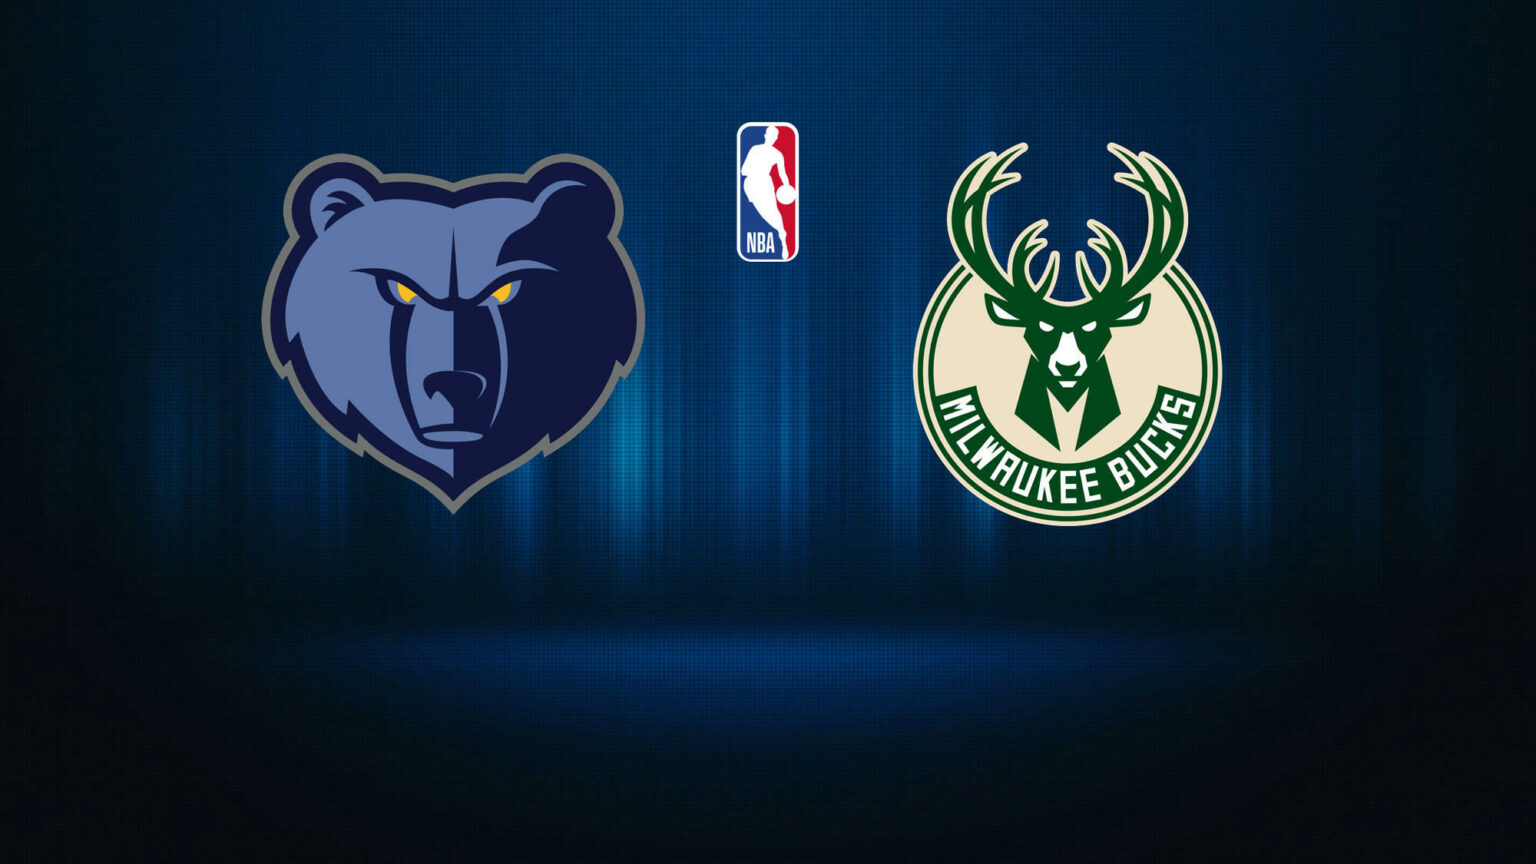 How to Live Stream the Bucks vs. Grizzlies Game Free, TV Channel Info, Game Time - Thursday, December 15, 2022